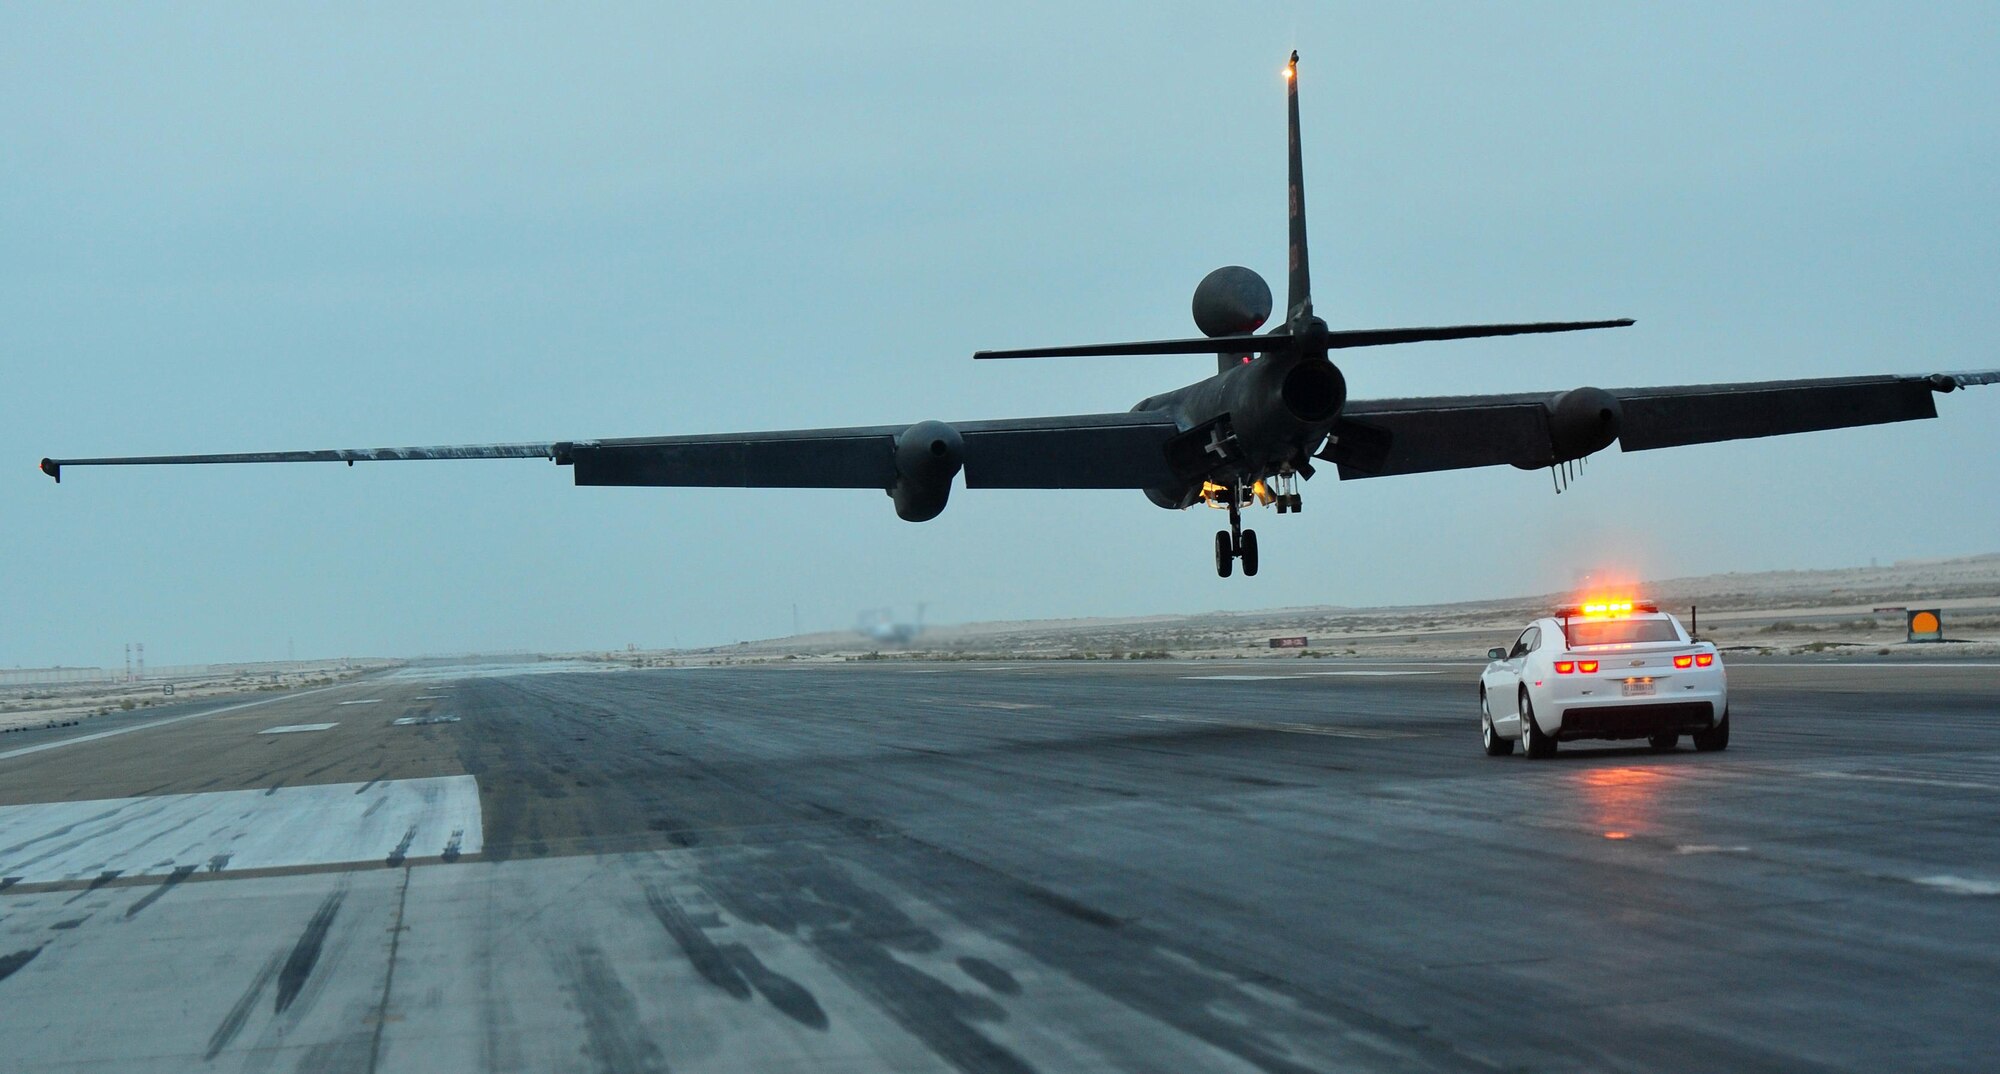 A mobile chase car driver pursues a U-2 Dragon Lady reconnaissance aircraft during its landing at an undisclosed location in Southwest Asia, Dec. 7, 2015. Mobile chase car drivers act as a second pair of eyes and ears for U-2 pilots during their launch and landings, radioing adjustments to the aircraft to make up for the pilot’s limited sight of the runway. (U.S. Air Force photo by Staff Sgt. Kentavist P. Brackin/released)